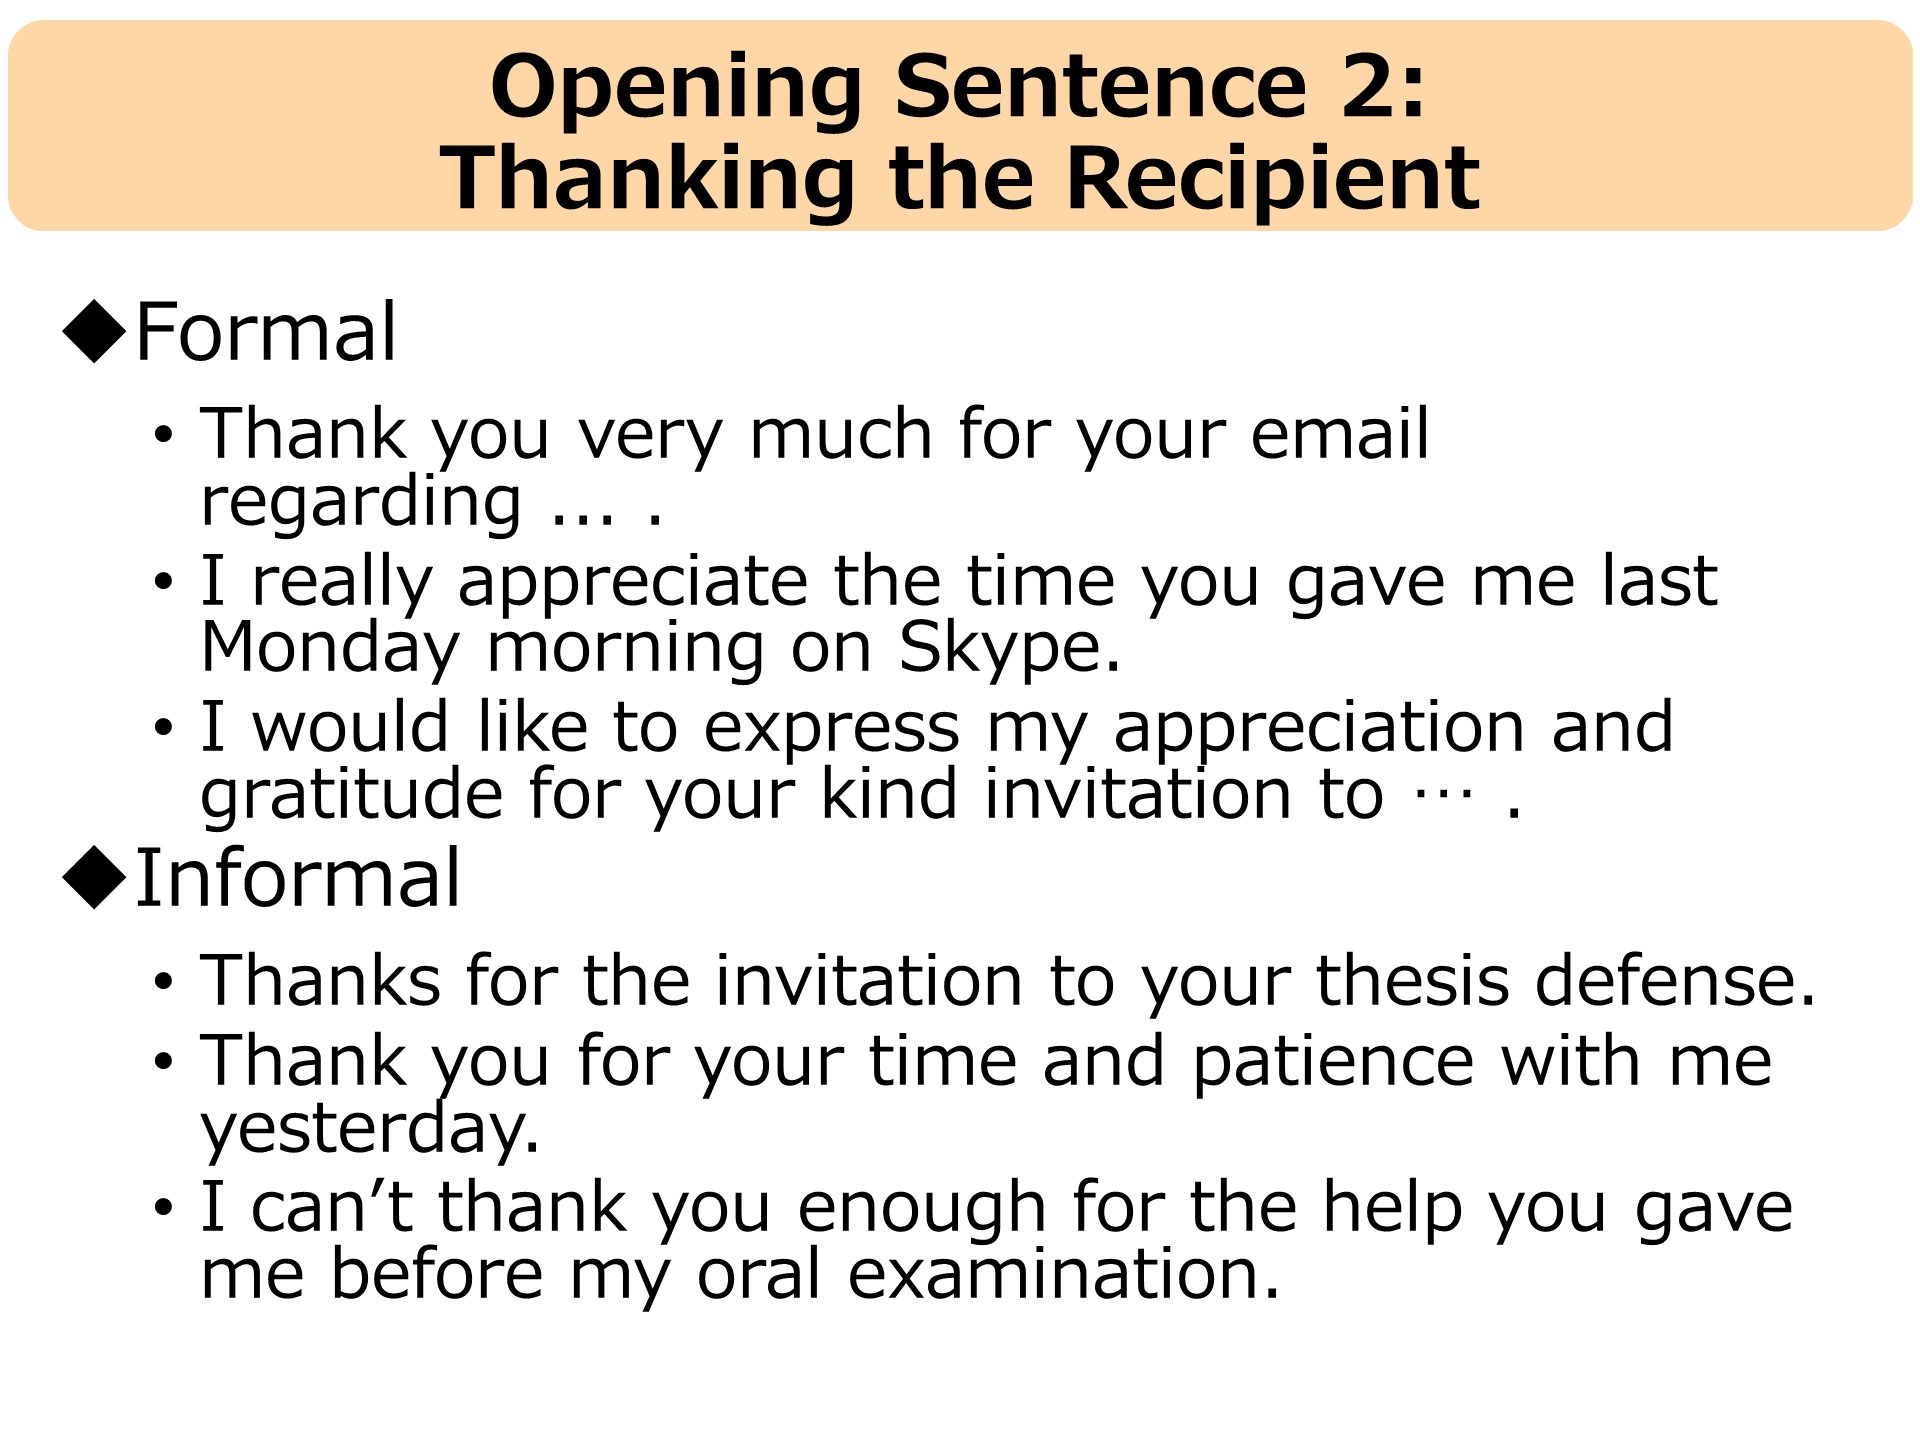 3.2.2 Initial Salutation, Module 3: Asking for Favors and Making Inquiries  by Email and Telephone, EA002 Courseware